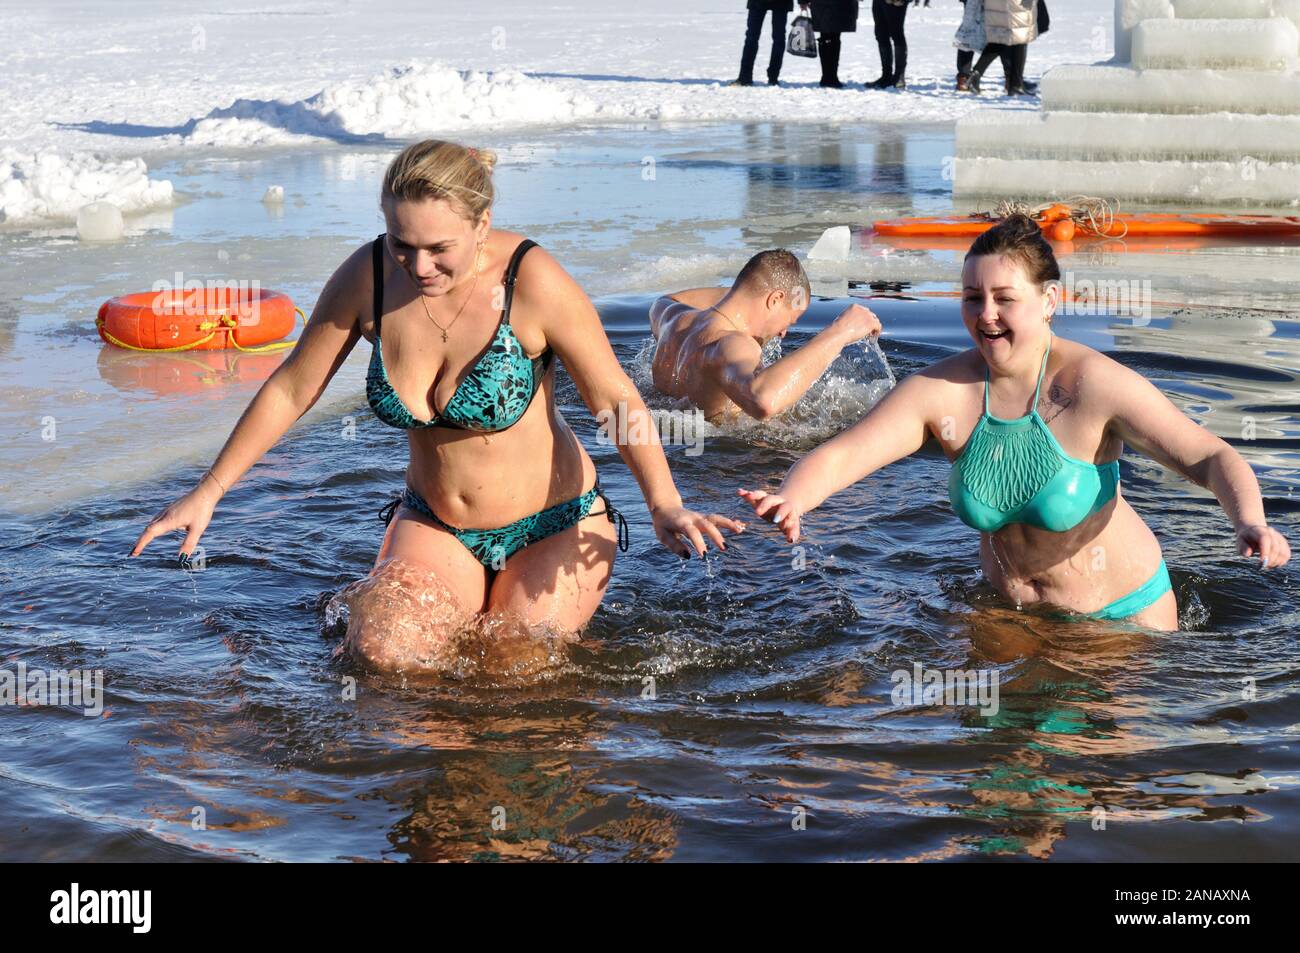 https://c8.alamy.com/comp/2ANAXNA/cherkasy-ukraine-january-19-2019-unidentified-people-swimming-in-ice-cold-water-during-epiphany-holy-baptism-in-the-orthodox-tradition-2ANAXNA.jpg